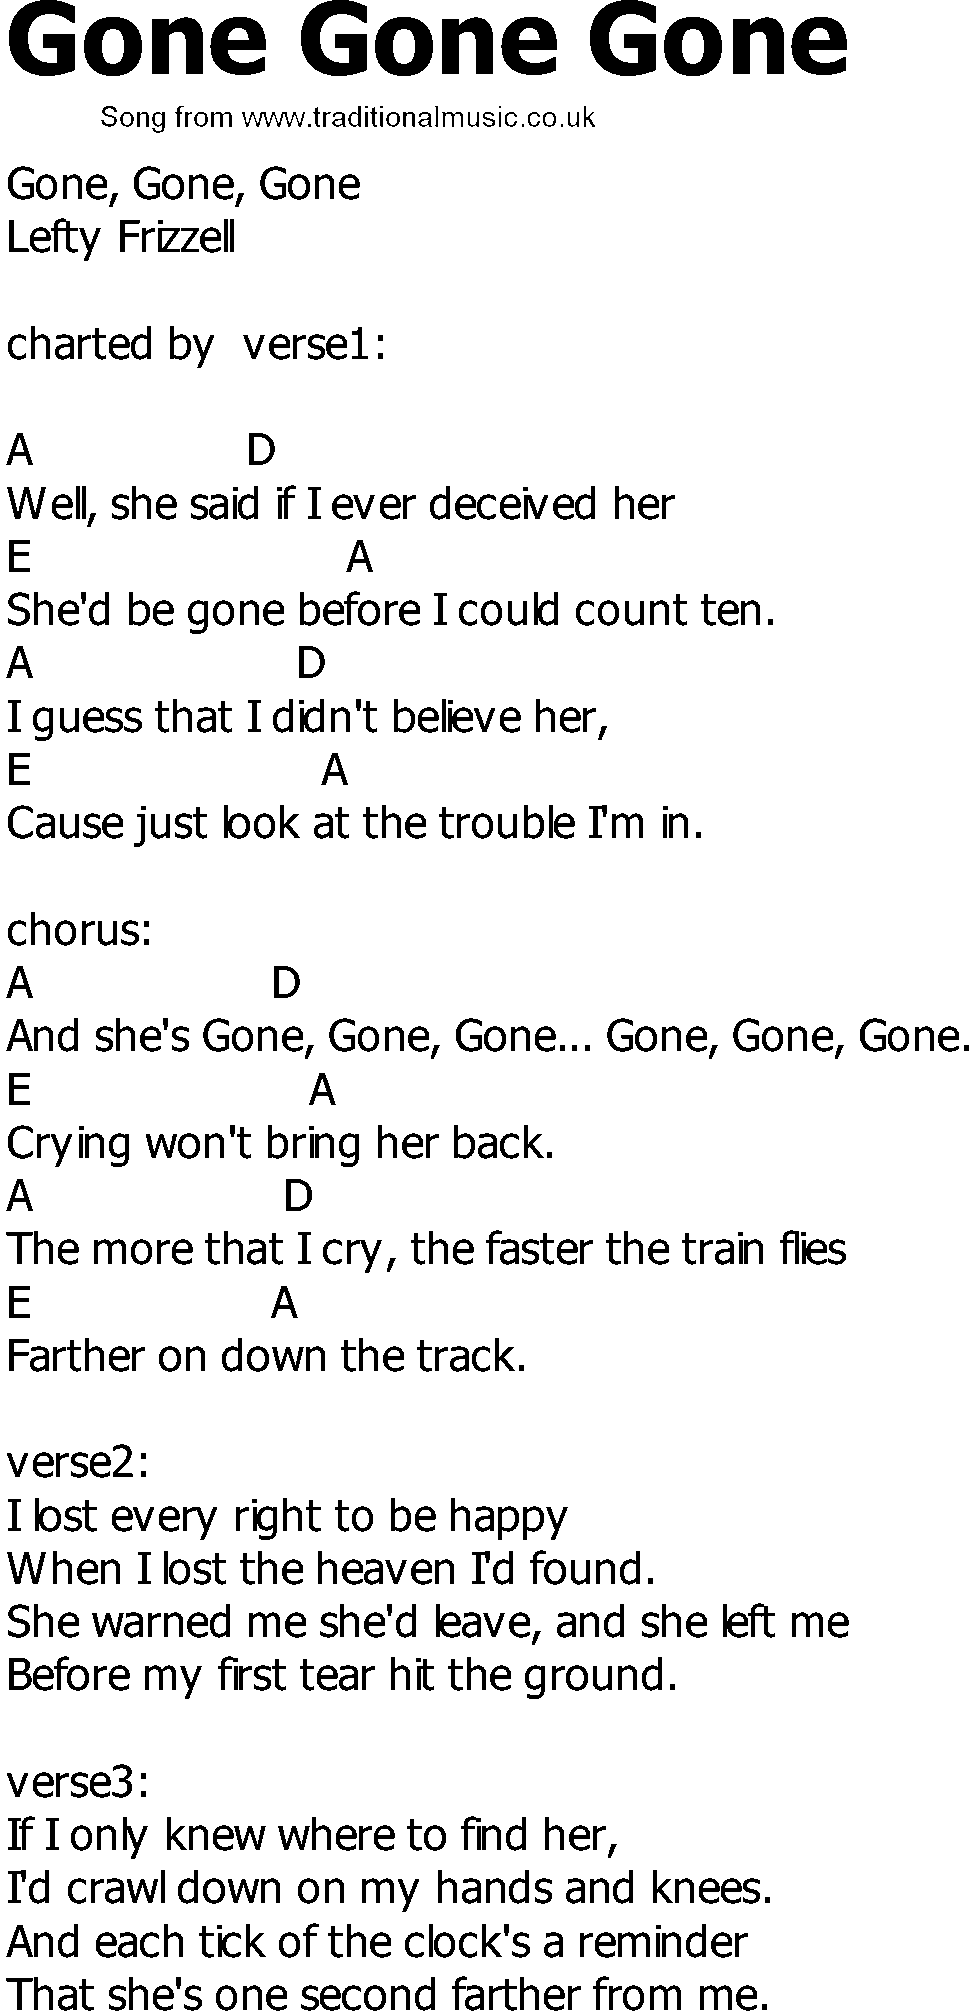 old-country-song-lyrics-with-chords-gone-gone-gone